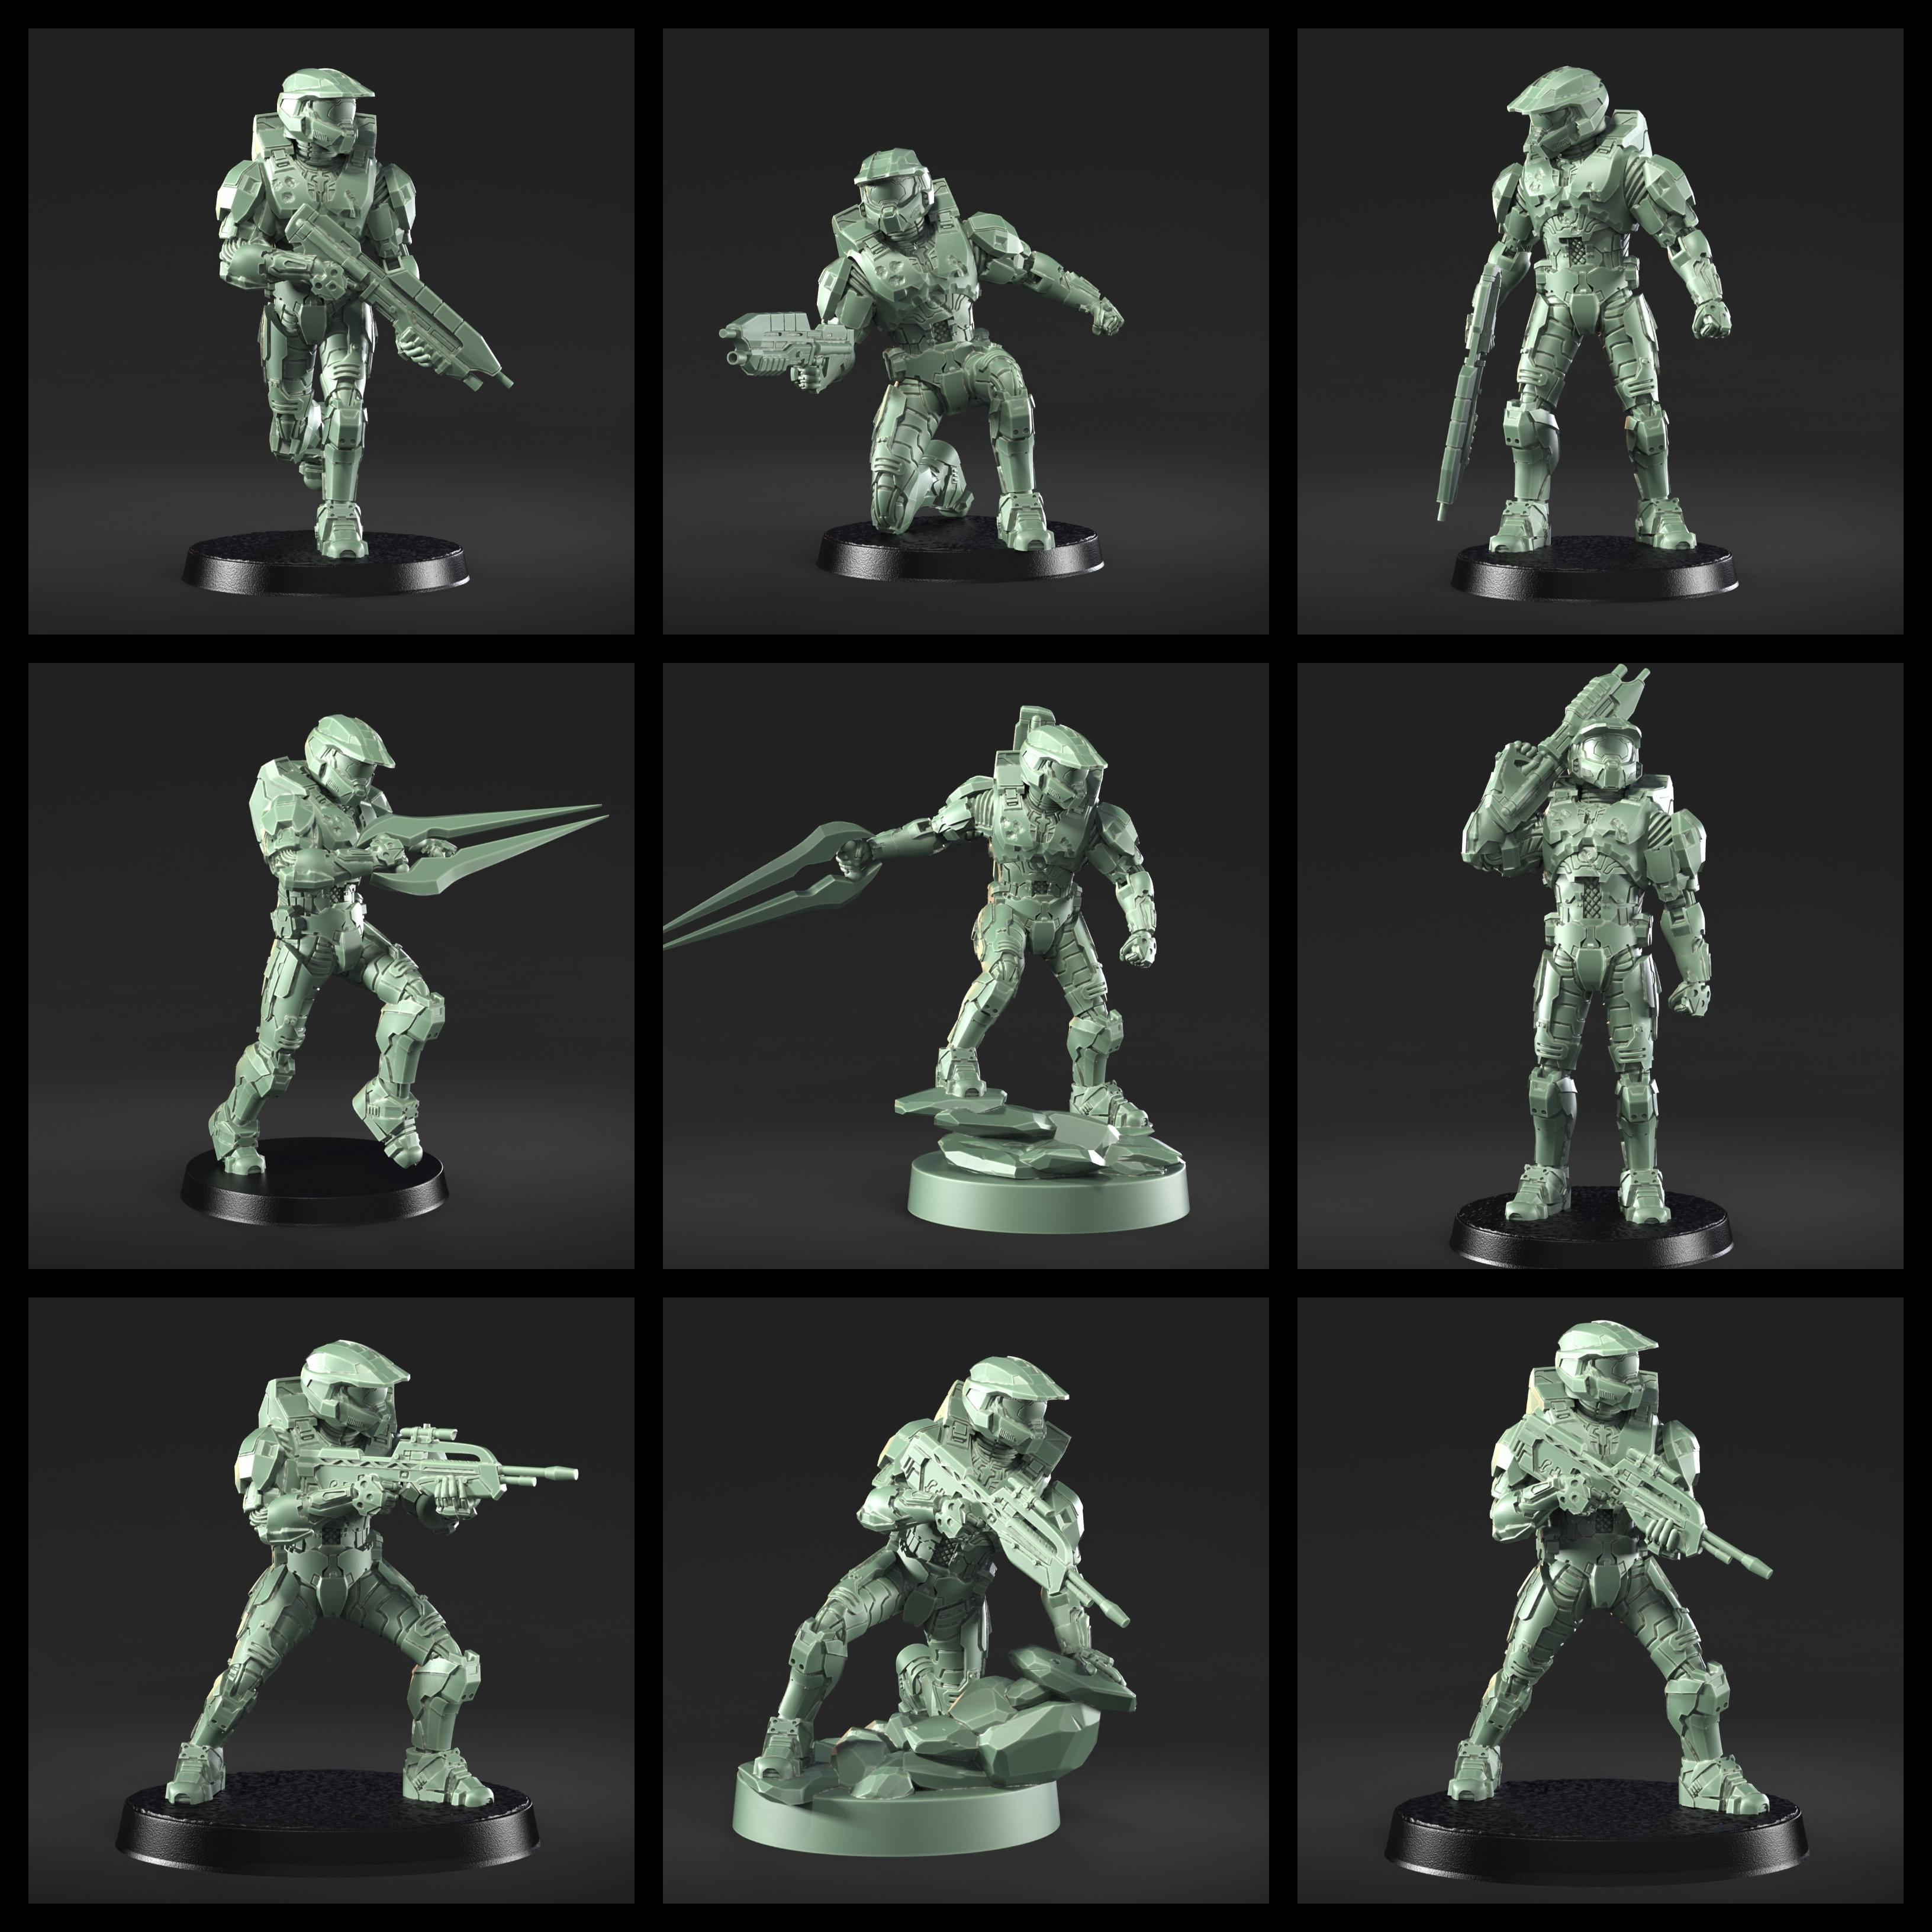 [New Files & Free Download!] The Halo 3 Master Chief Miniatures have been added to the February rewards